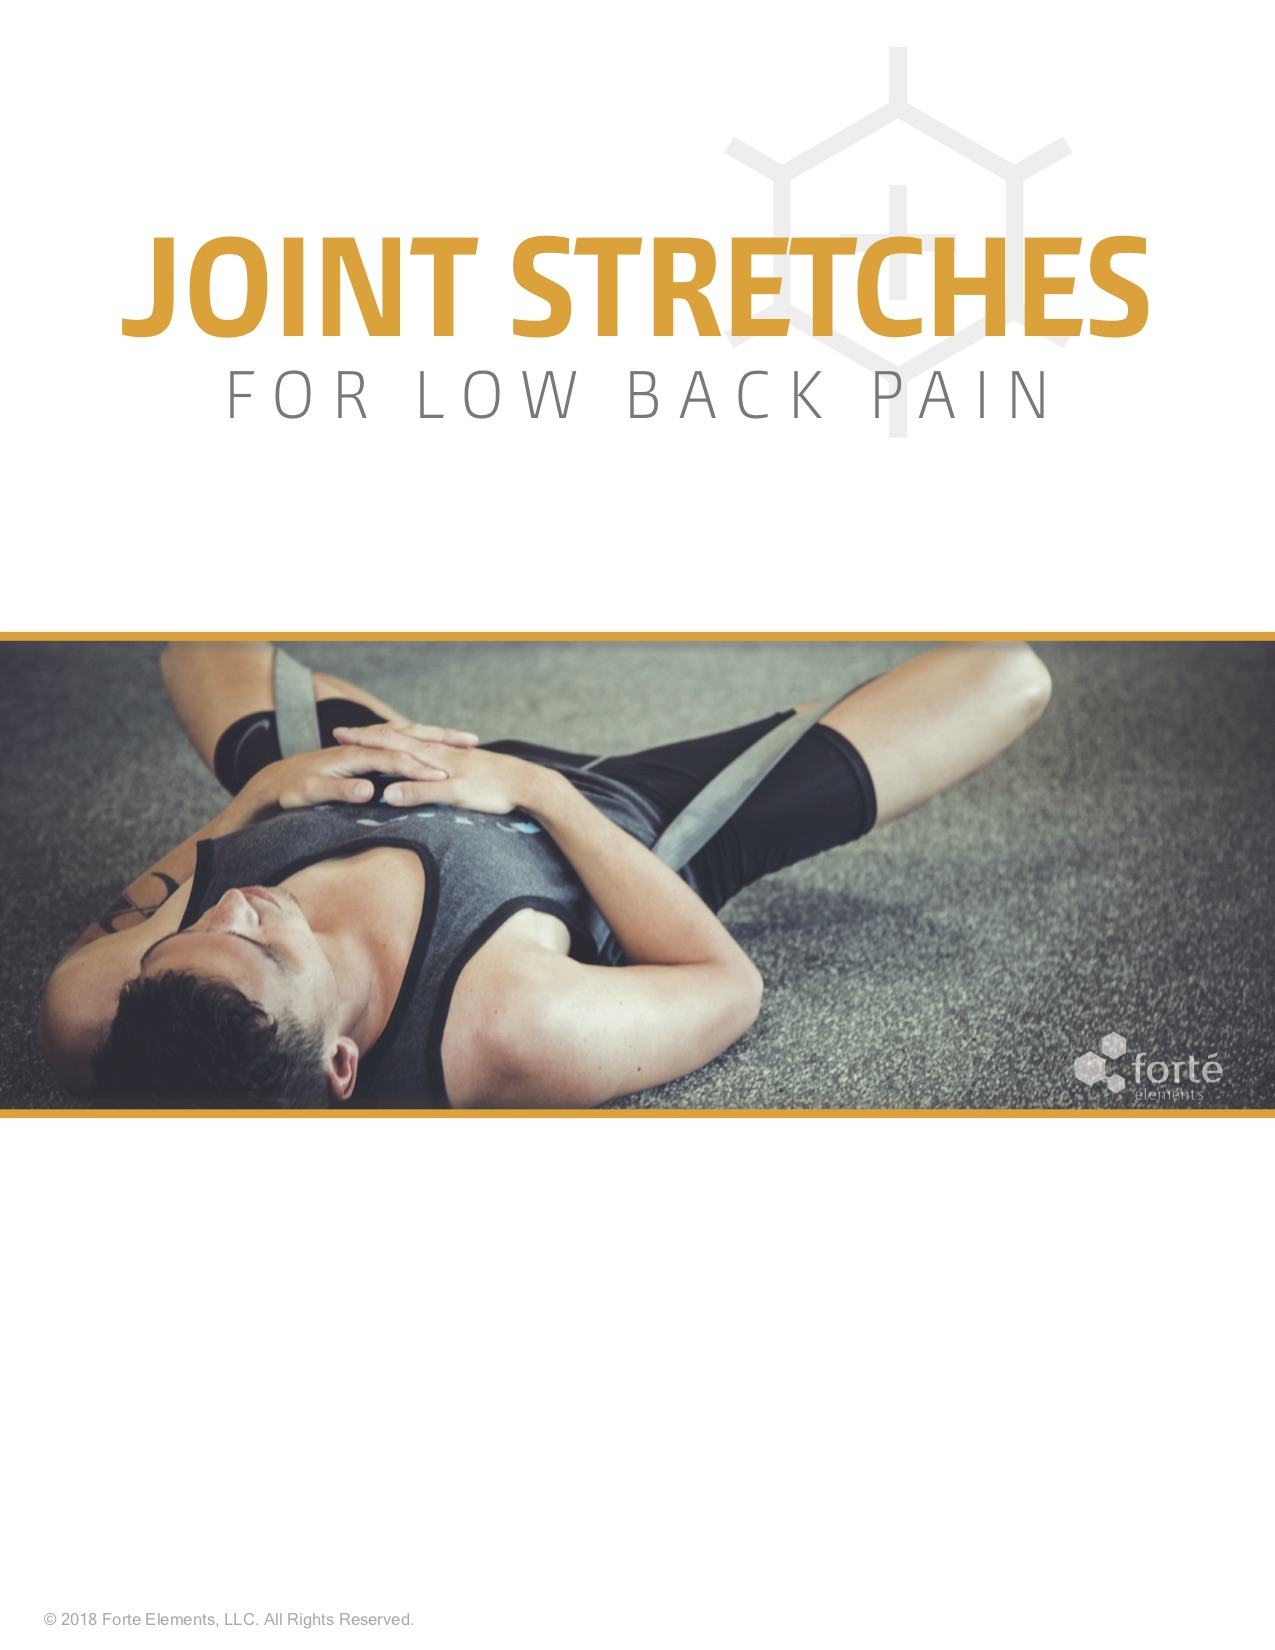 Stretches for Low Back Pain (dragged) copy